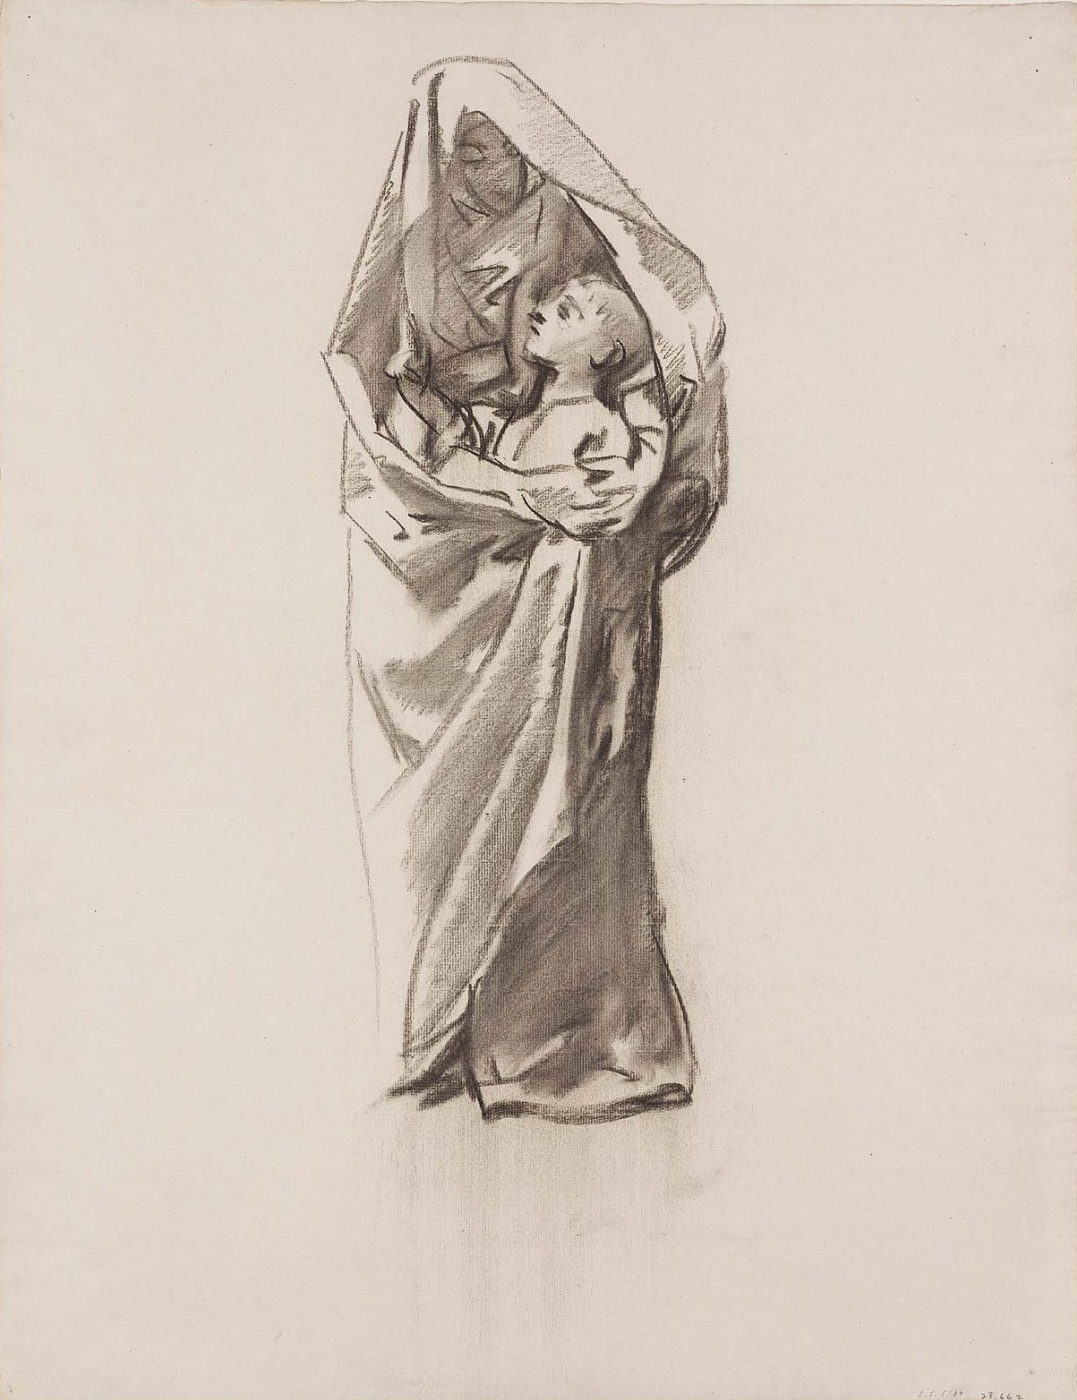 John Singer Sargent. Sketch for "Joyful mystery". The mother of God embraces the child in the temple